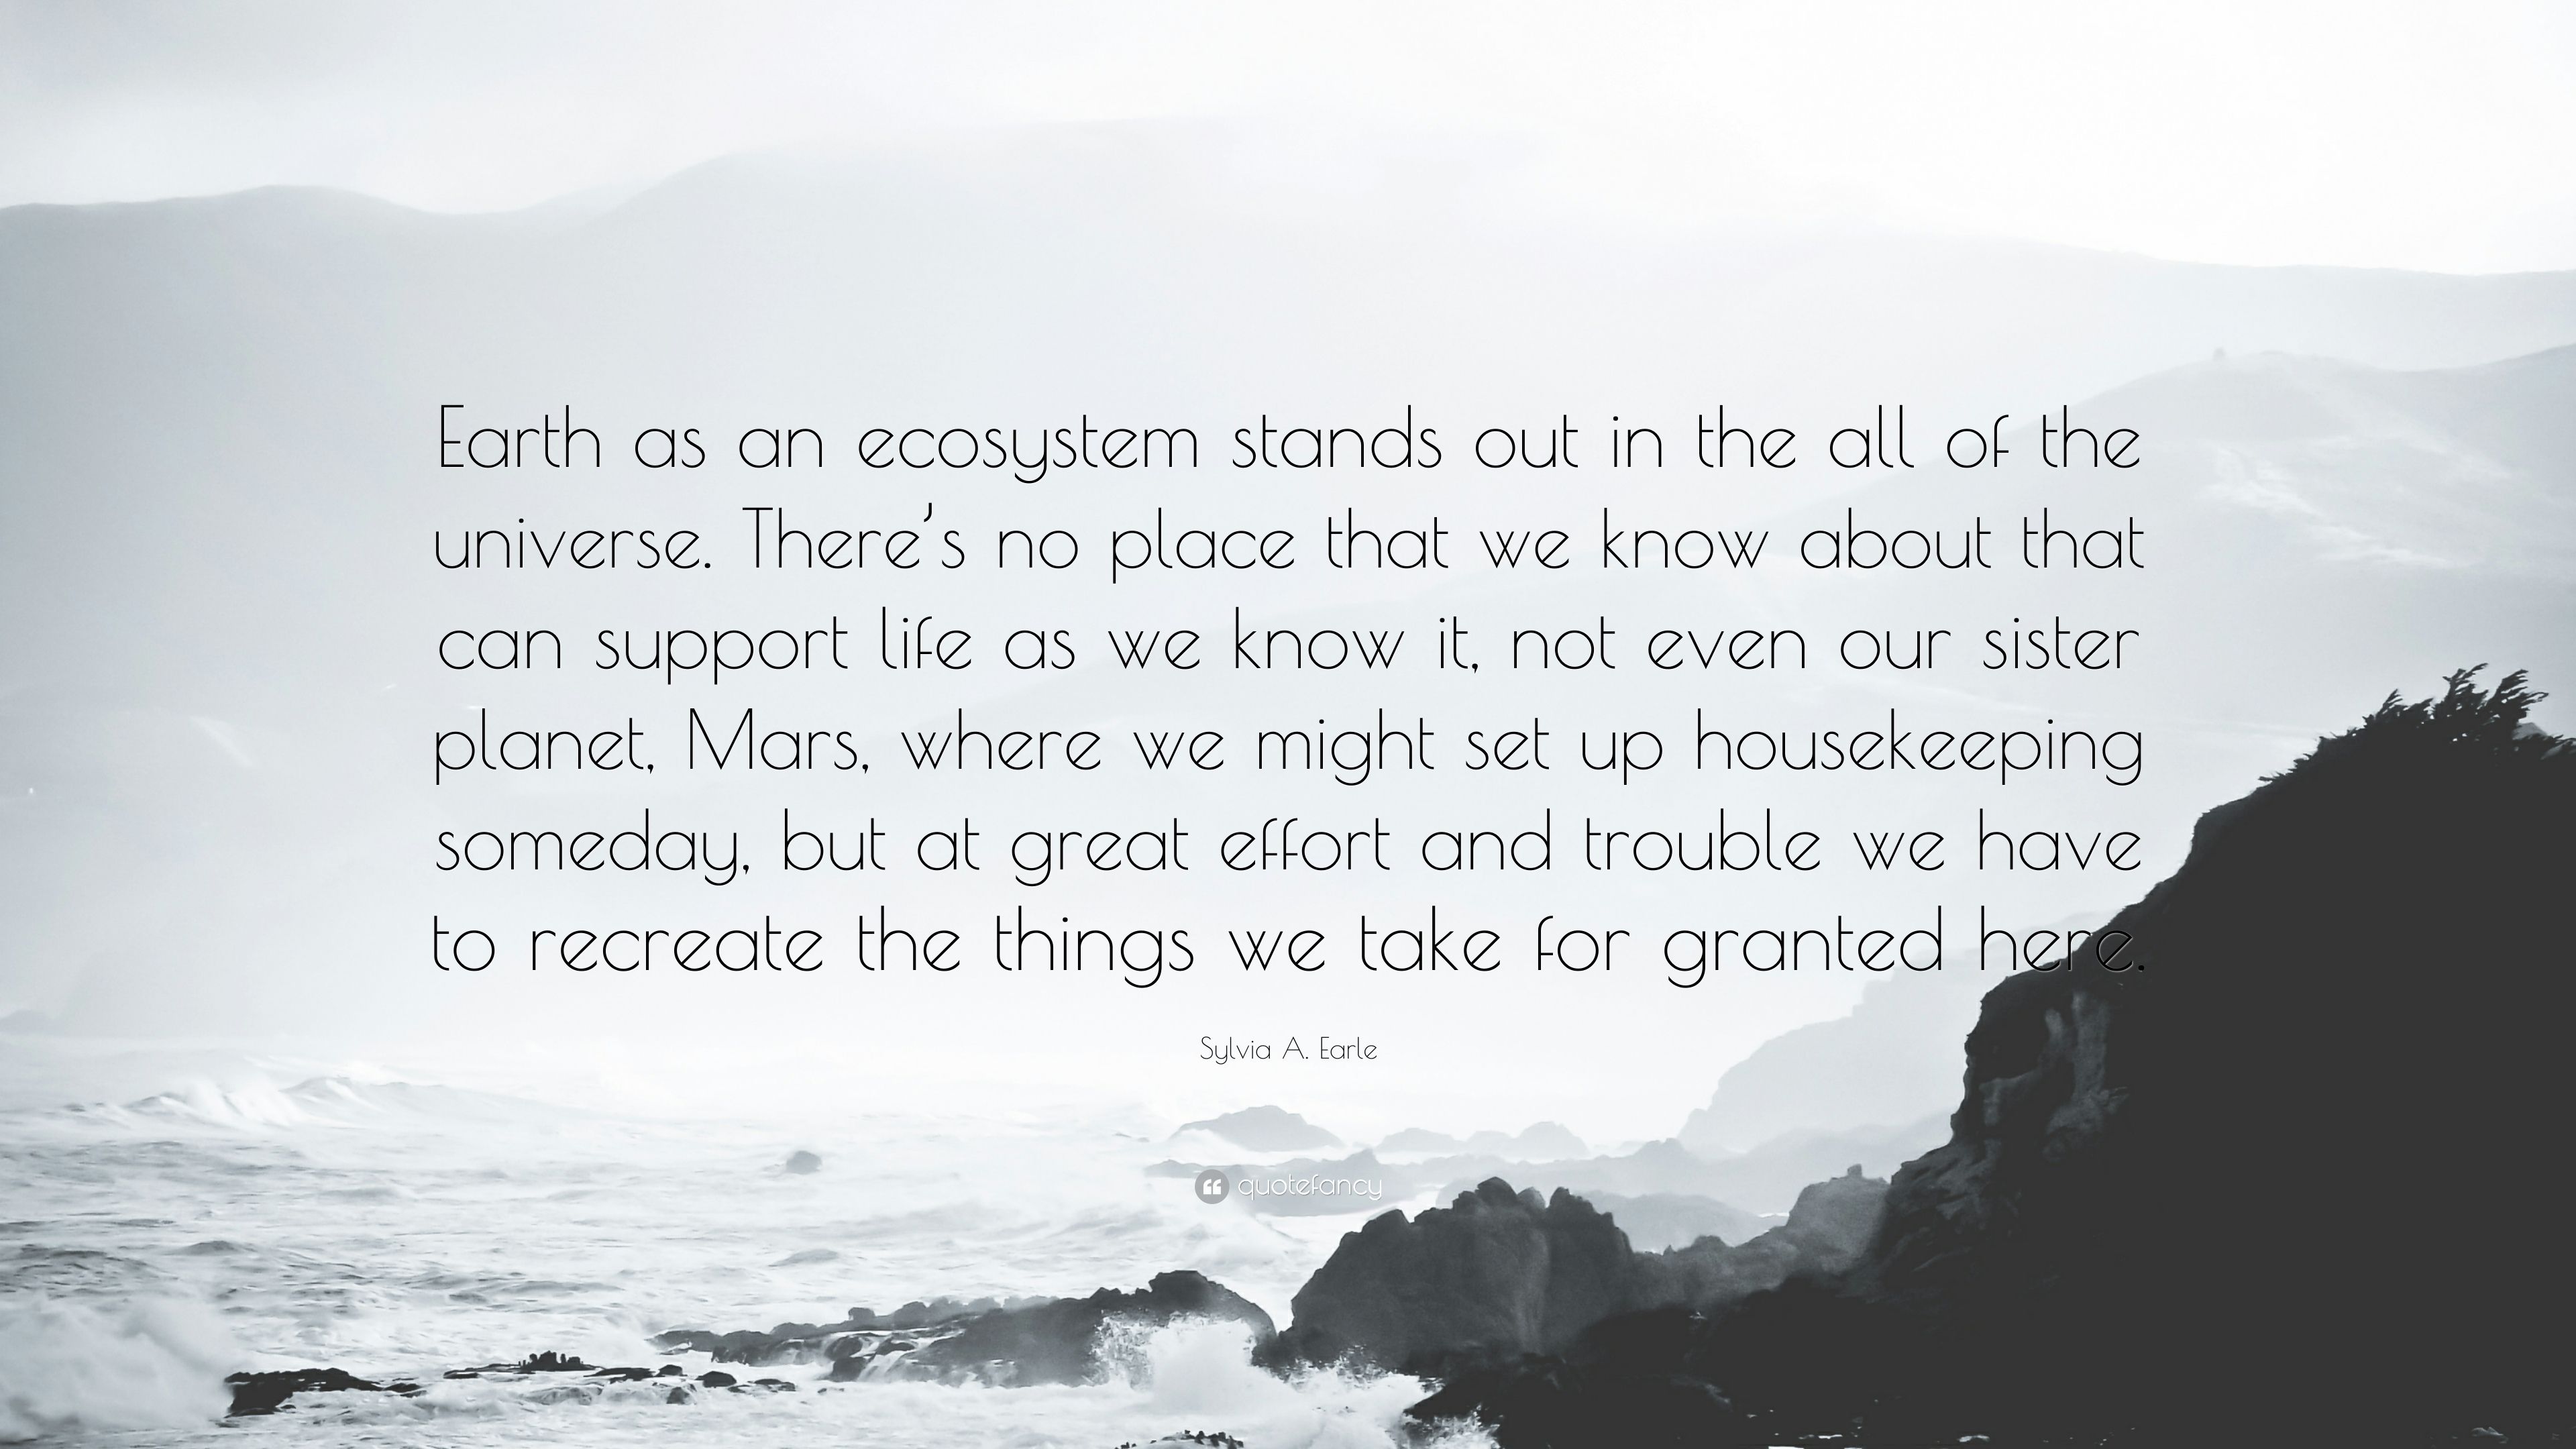 Sylvia A. Earle Quote: “Earth as an ecosystem stands out in